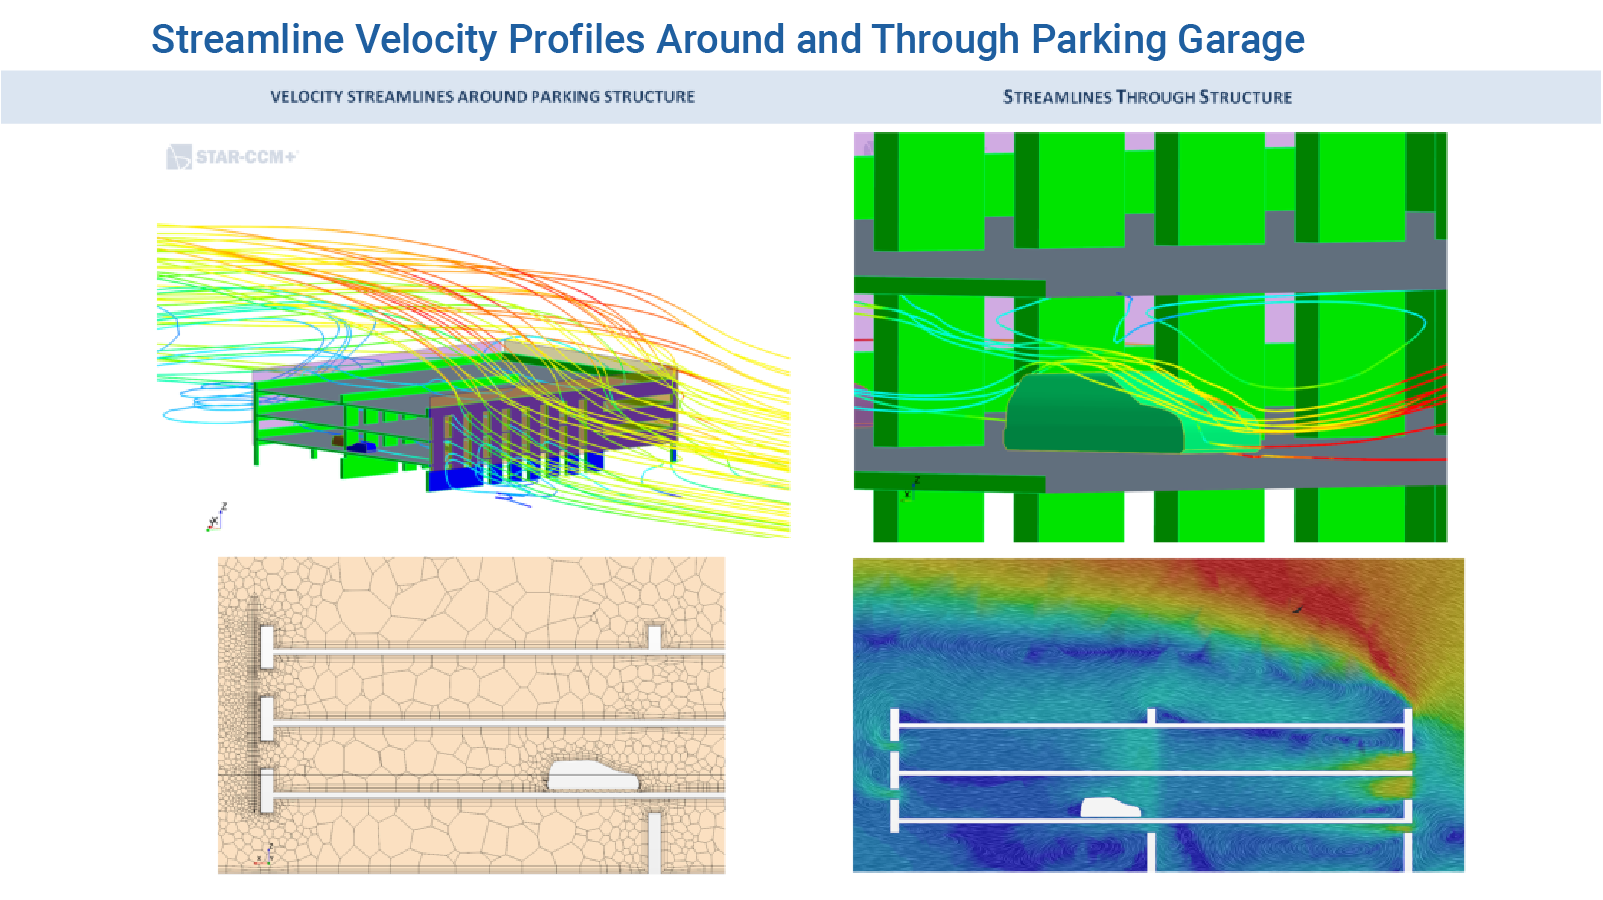 STAR-CCM+ modeling details to capture airflow through the parking garage structure